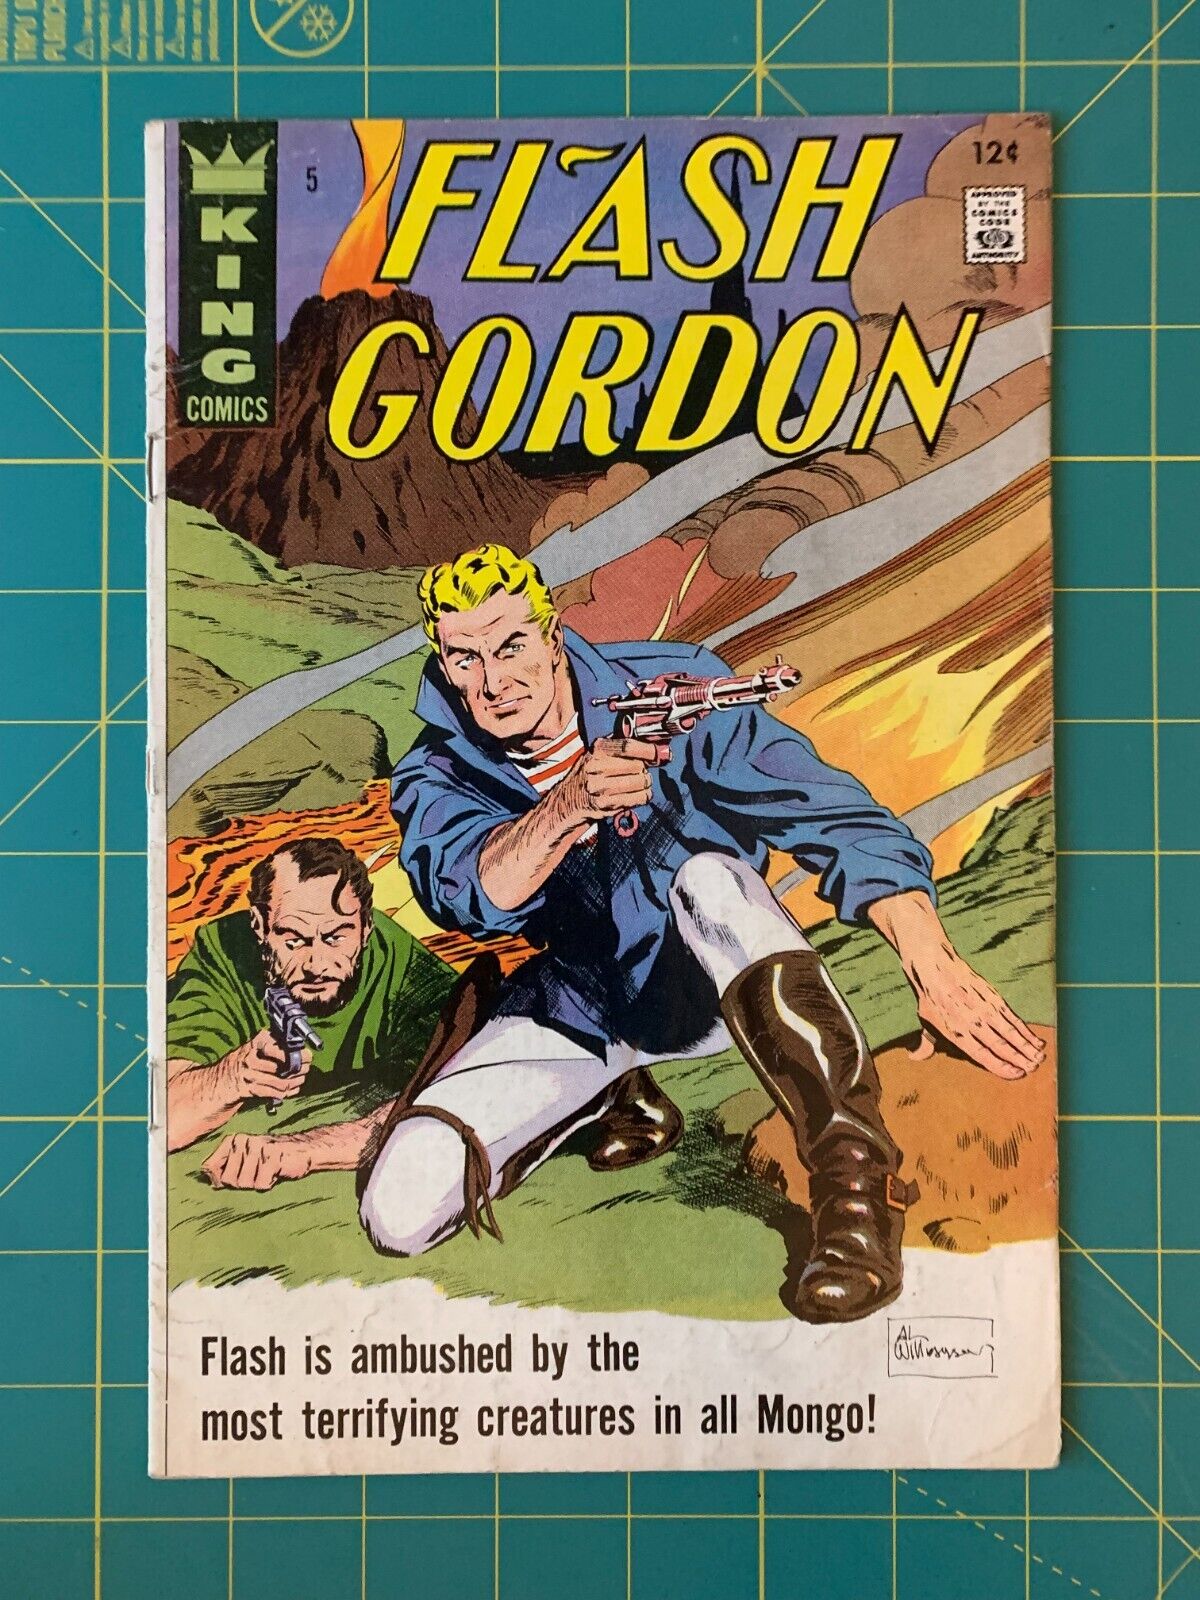 Flash Gordon #5 - May 1967 - King Features Syndicate - (8502)